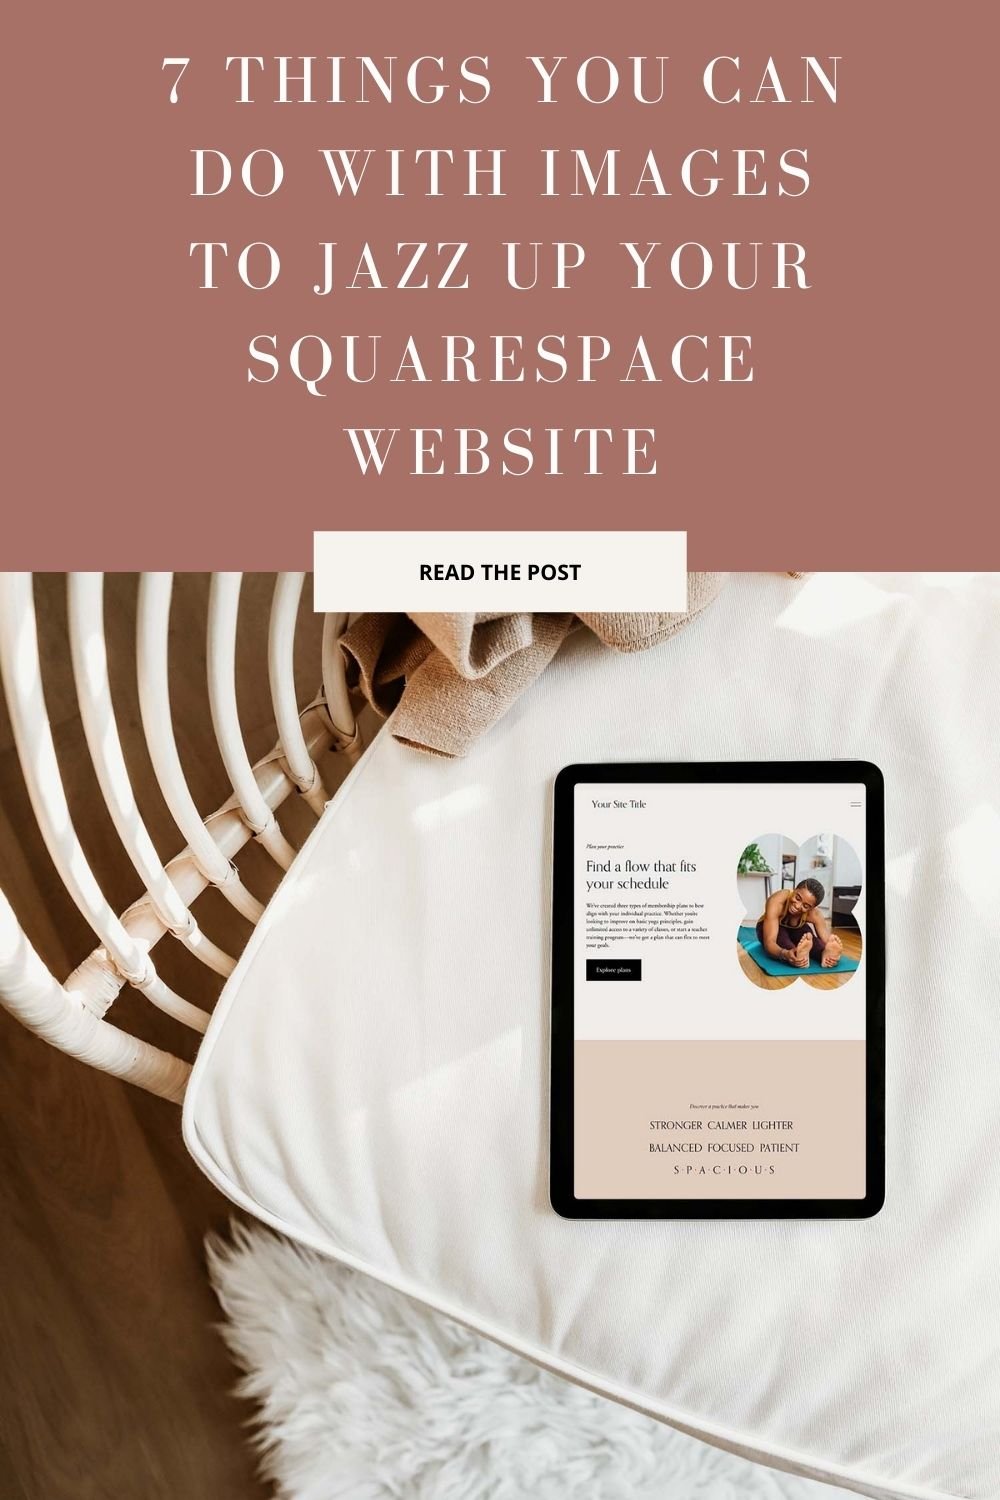 7 things you can do with images to jazz up your Squarespace website | Jodi Neufeld Design